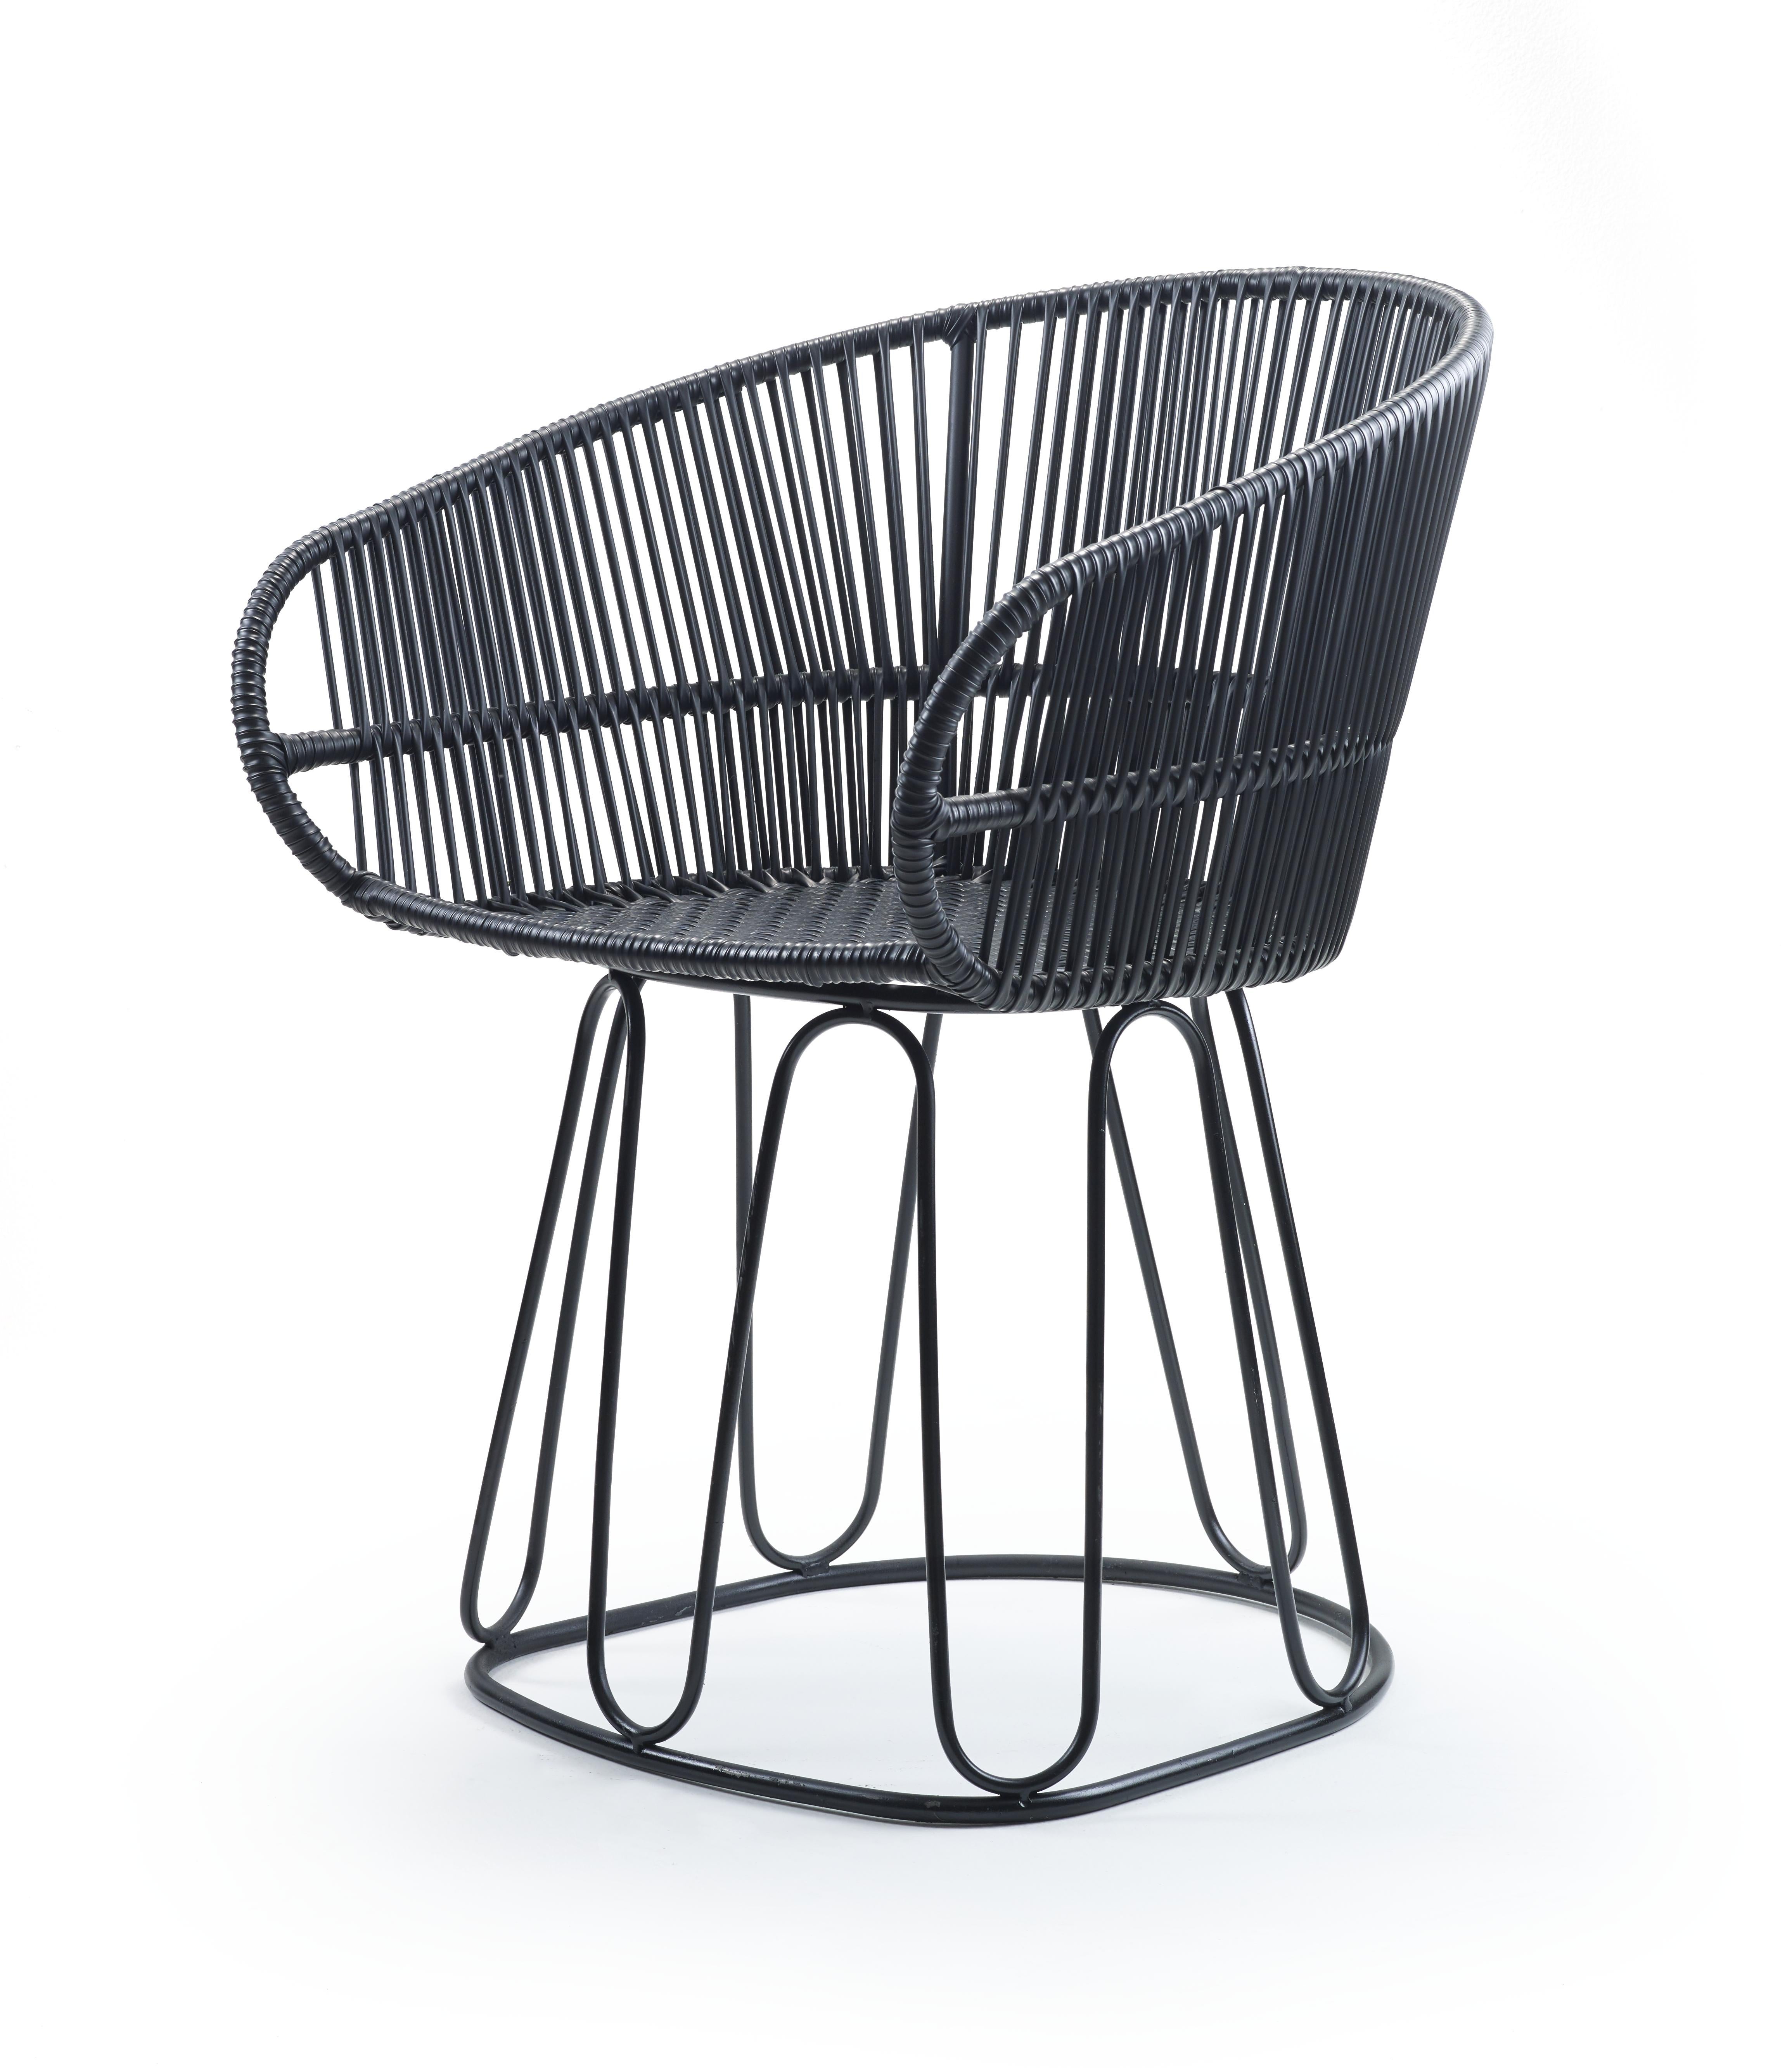 Set of 2 black circo dining chair by Sebastian Herkner.
Materials: Galvanized and powder-coated tubular steel. PVC strings.
Technique: Made from recycled plastic. Weaved by local craftspeople in Colombia. 
Dimensions: W 61.5 x D 56.5 x H 77.5 cm